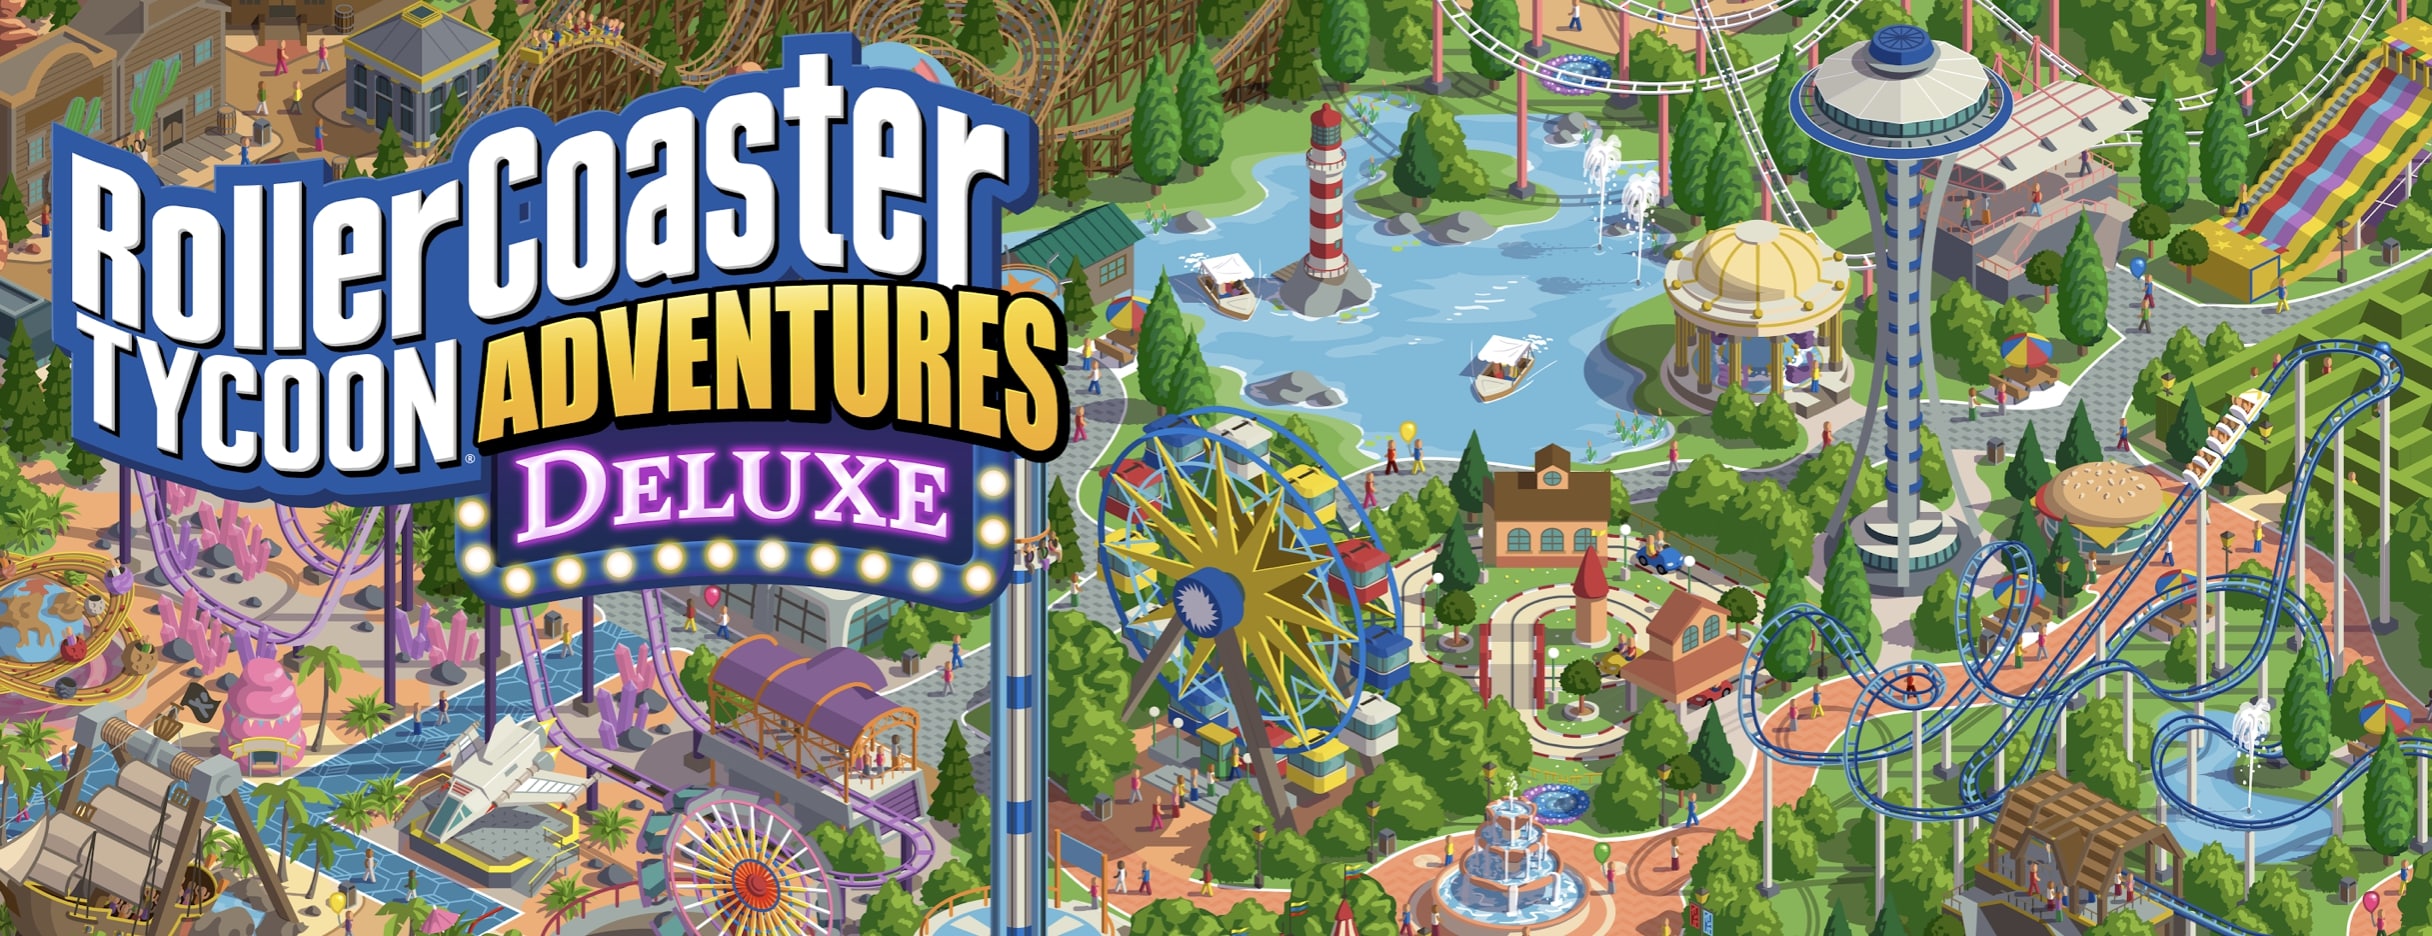 RollerCoaster Tycoon World - RollerCoaster Tycoon - The Ultimate